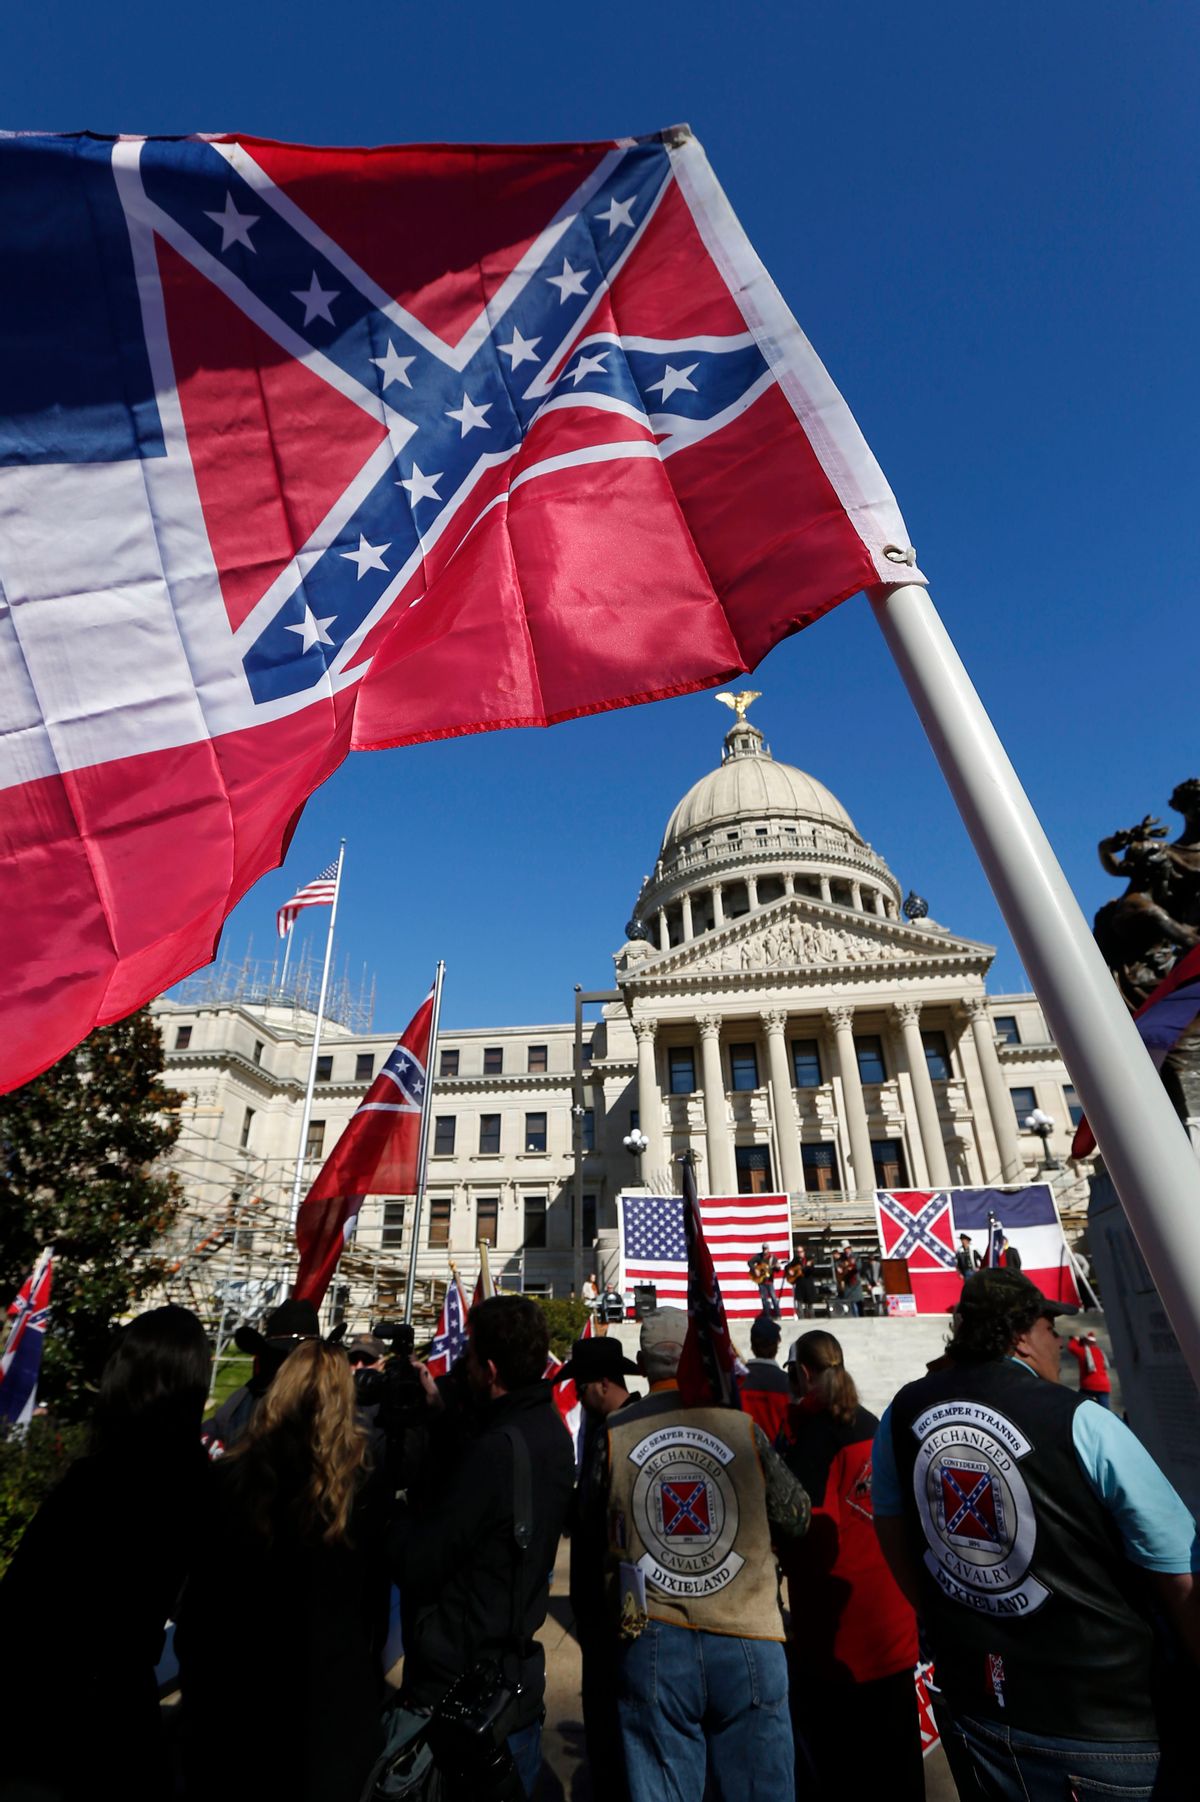 Sons of Confederate Veterans and other groups parade on the grounds of the state Capitol in Jackson, Miss., Tuesday, Jan. 19, 2016, in support of keeping the Confederate battle emblem on the state flag. The public display of Confederate symbols has come under increased scrutiny since June, when nine black worshippers were massacred at a church in South Carolina.(AP Photo/Rogelio V. Solis) (AP)